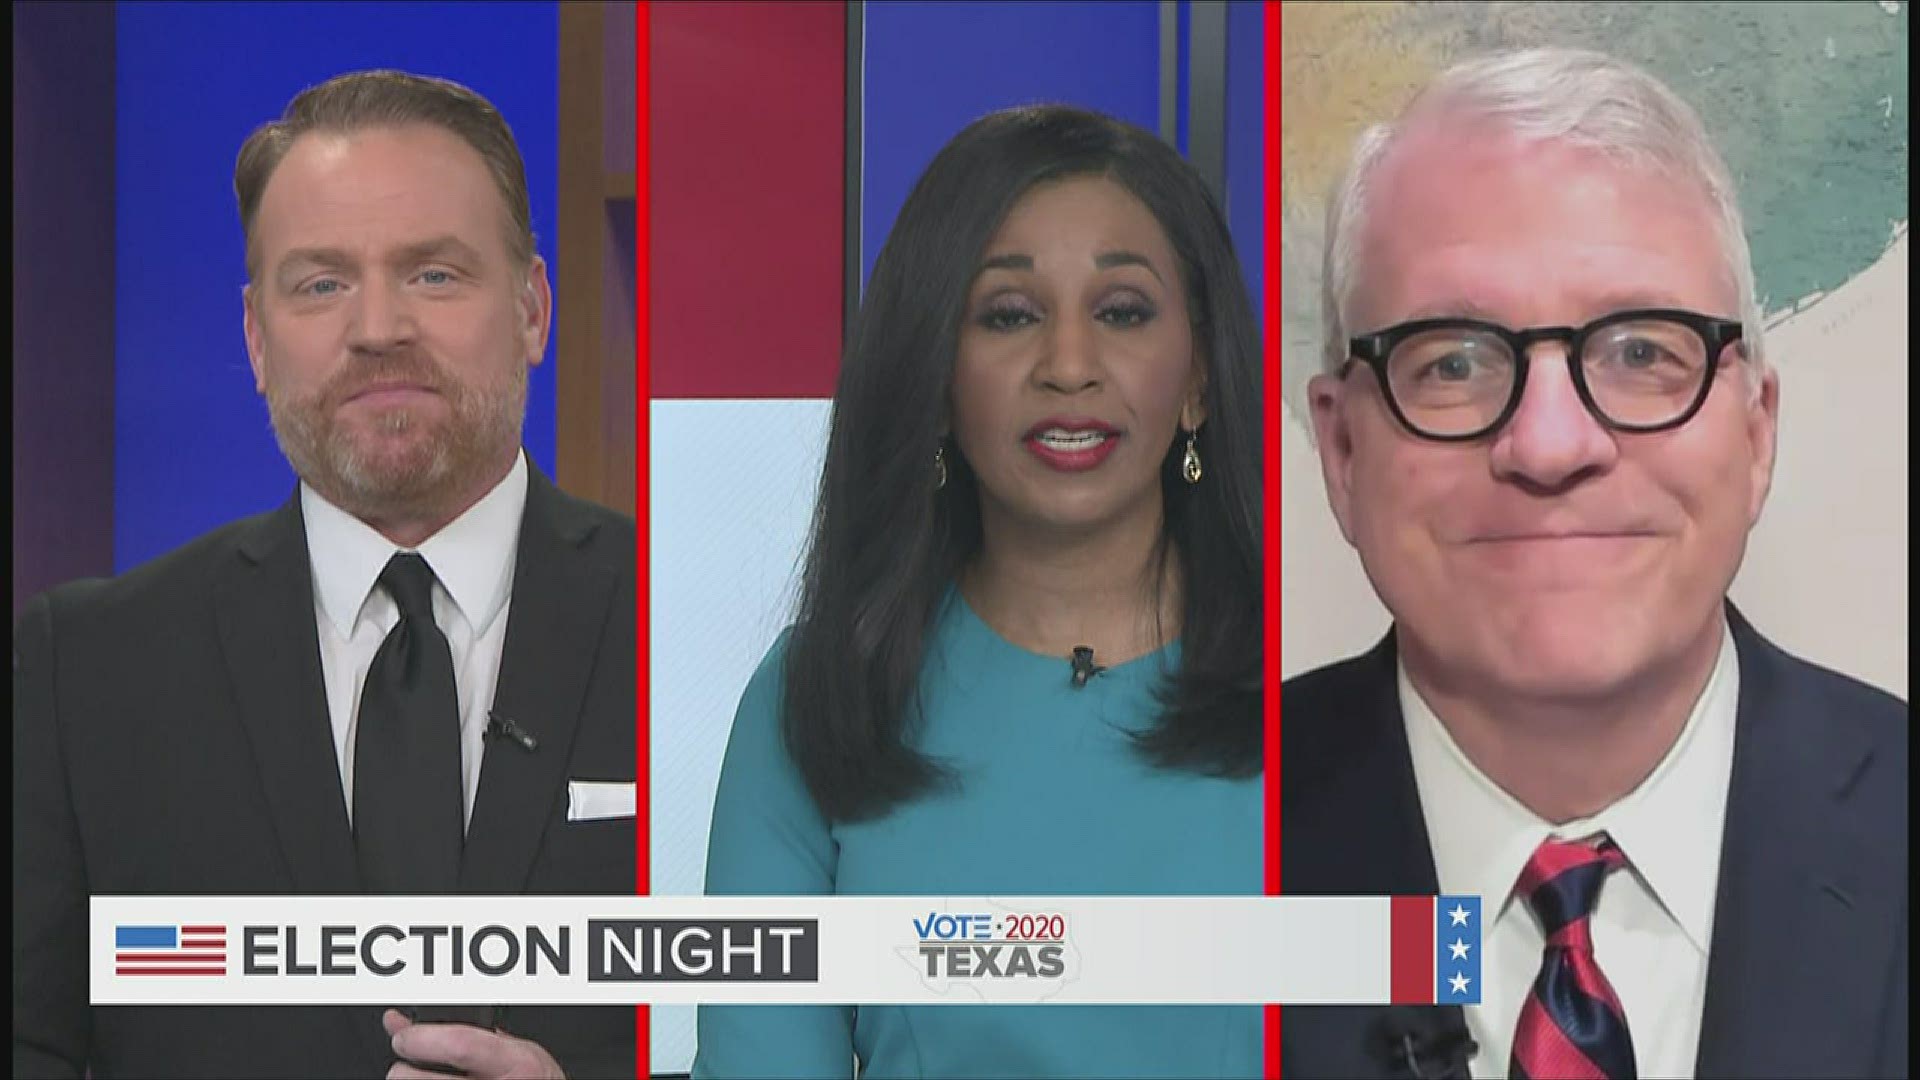 Texas Tribune Executive Editor Ross Ramsey joins KVUE to talk about the 2020 Election.